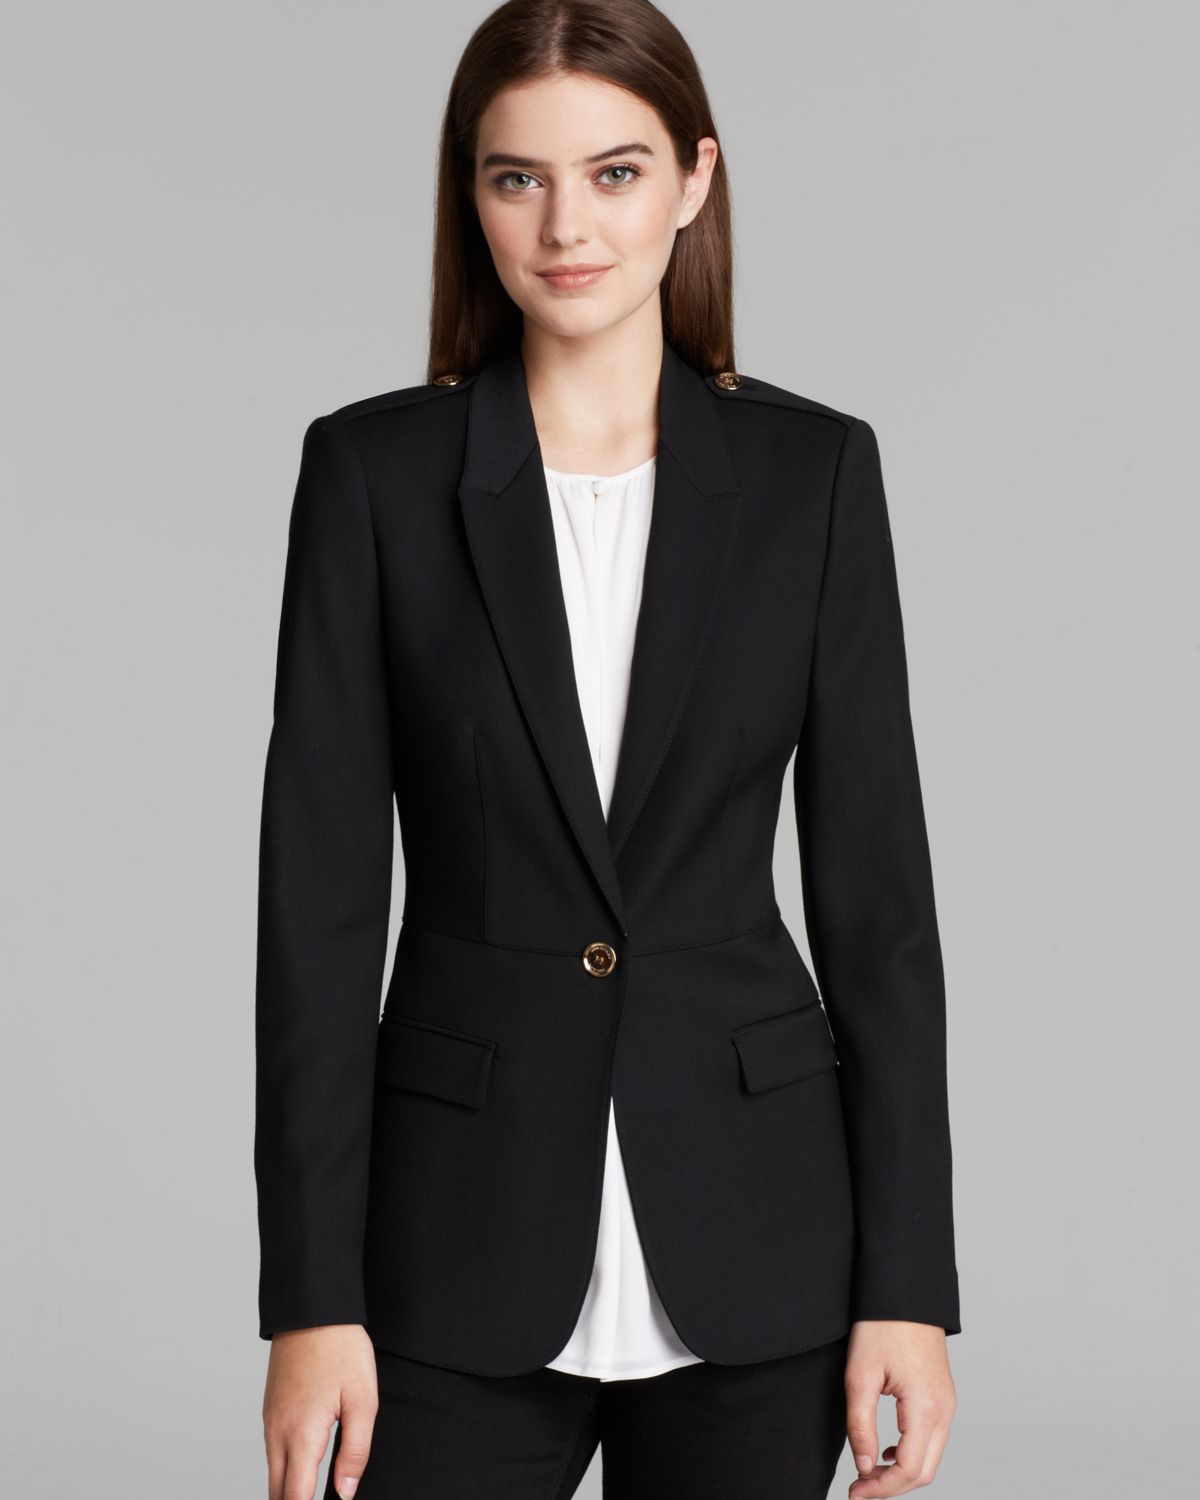 burberry suit womens Cheaper Than Retail Price> Buy Clothing, Accessories  and lifestyle products for women & men -